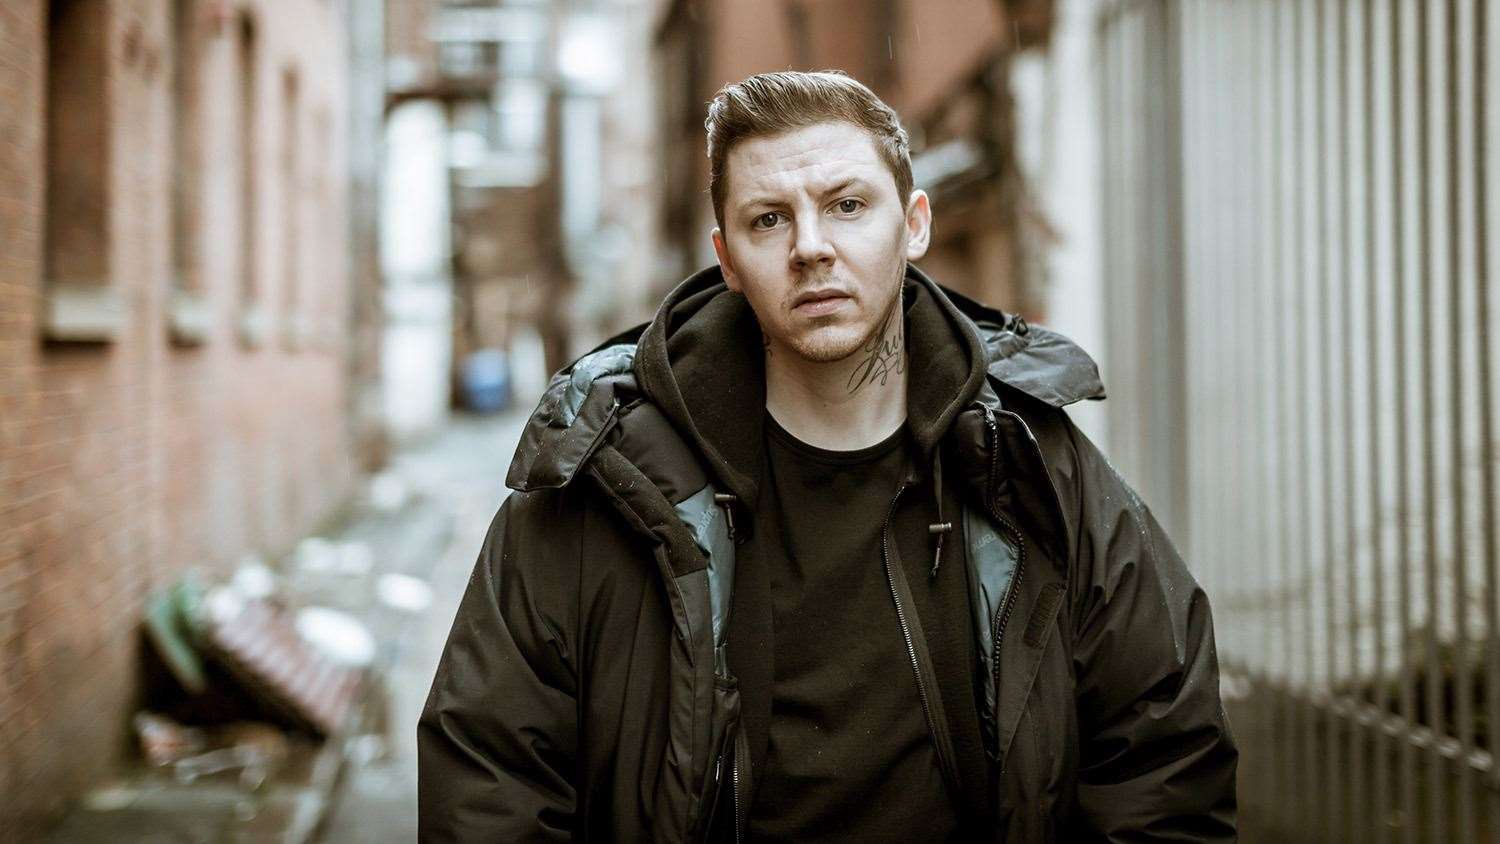 Read All About It: Professor Green will be visiting Tunbridge Wells this summer